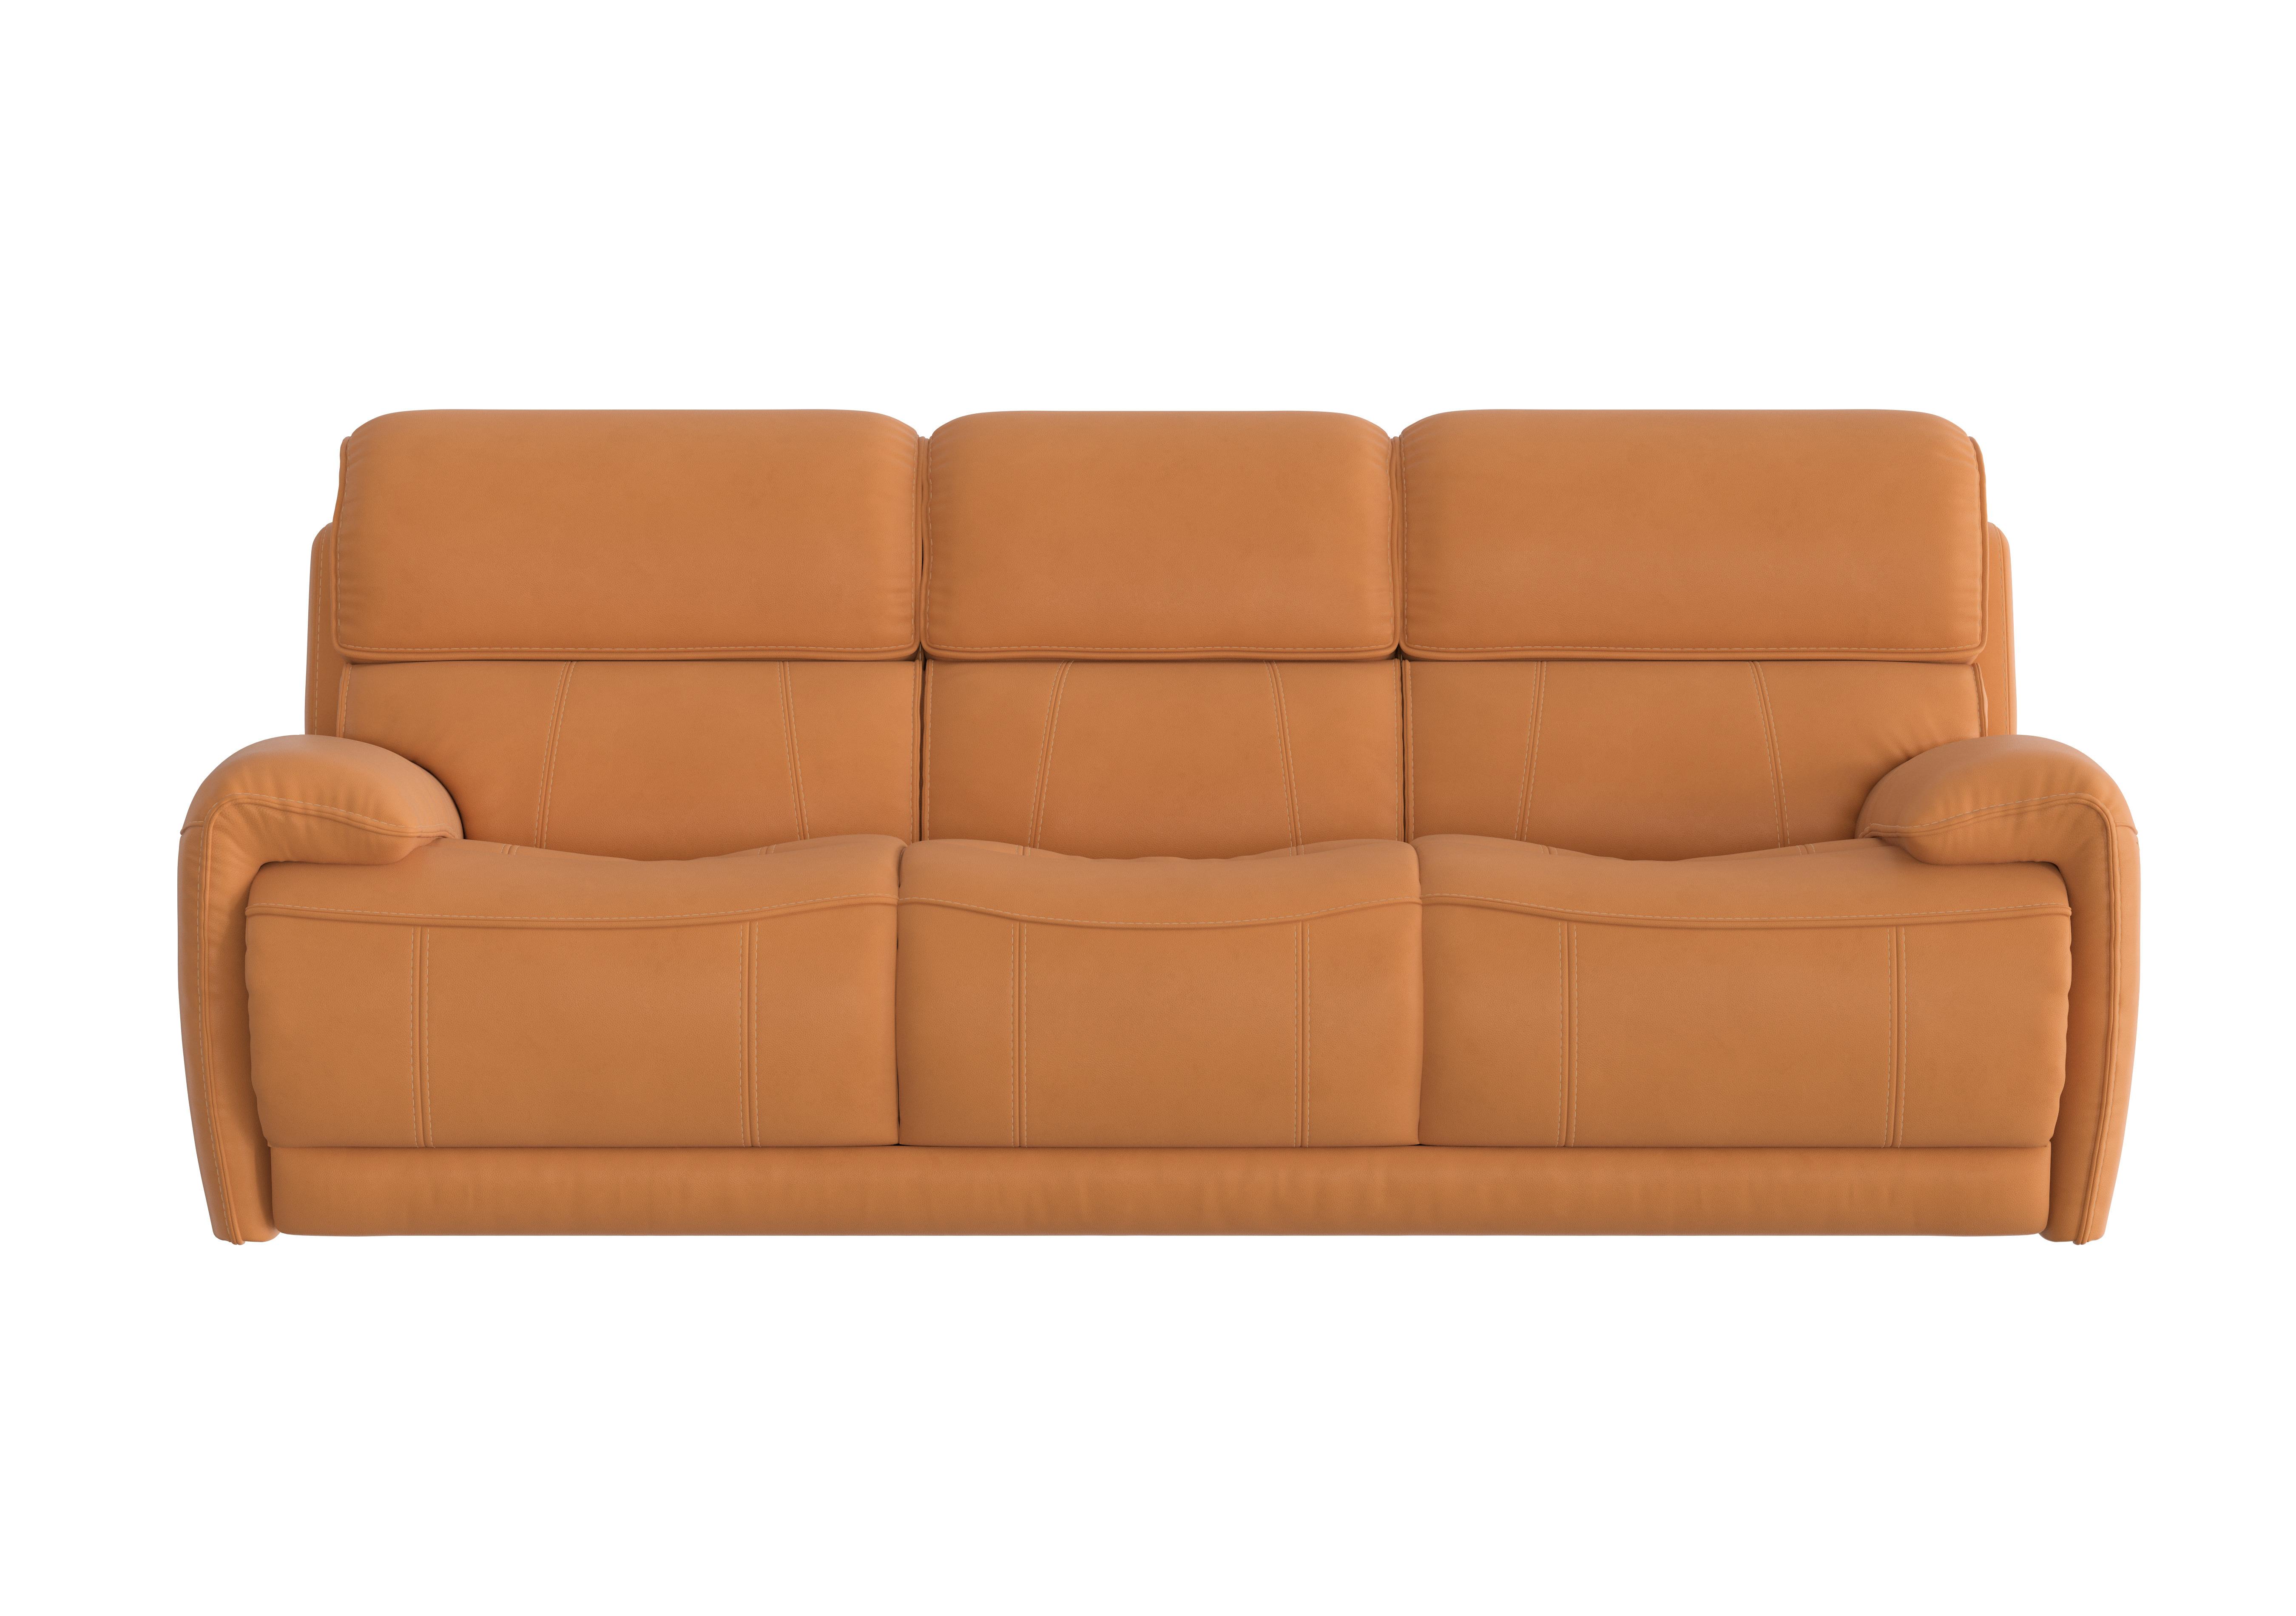 Link 3 Seater Leather Sofa in Bv-335e Honey Yellow on Furniture Village